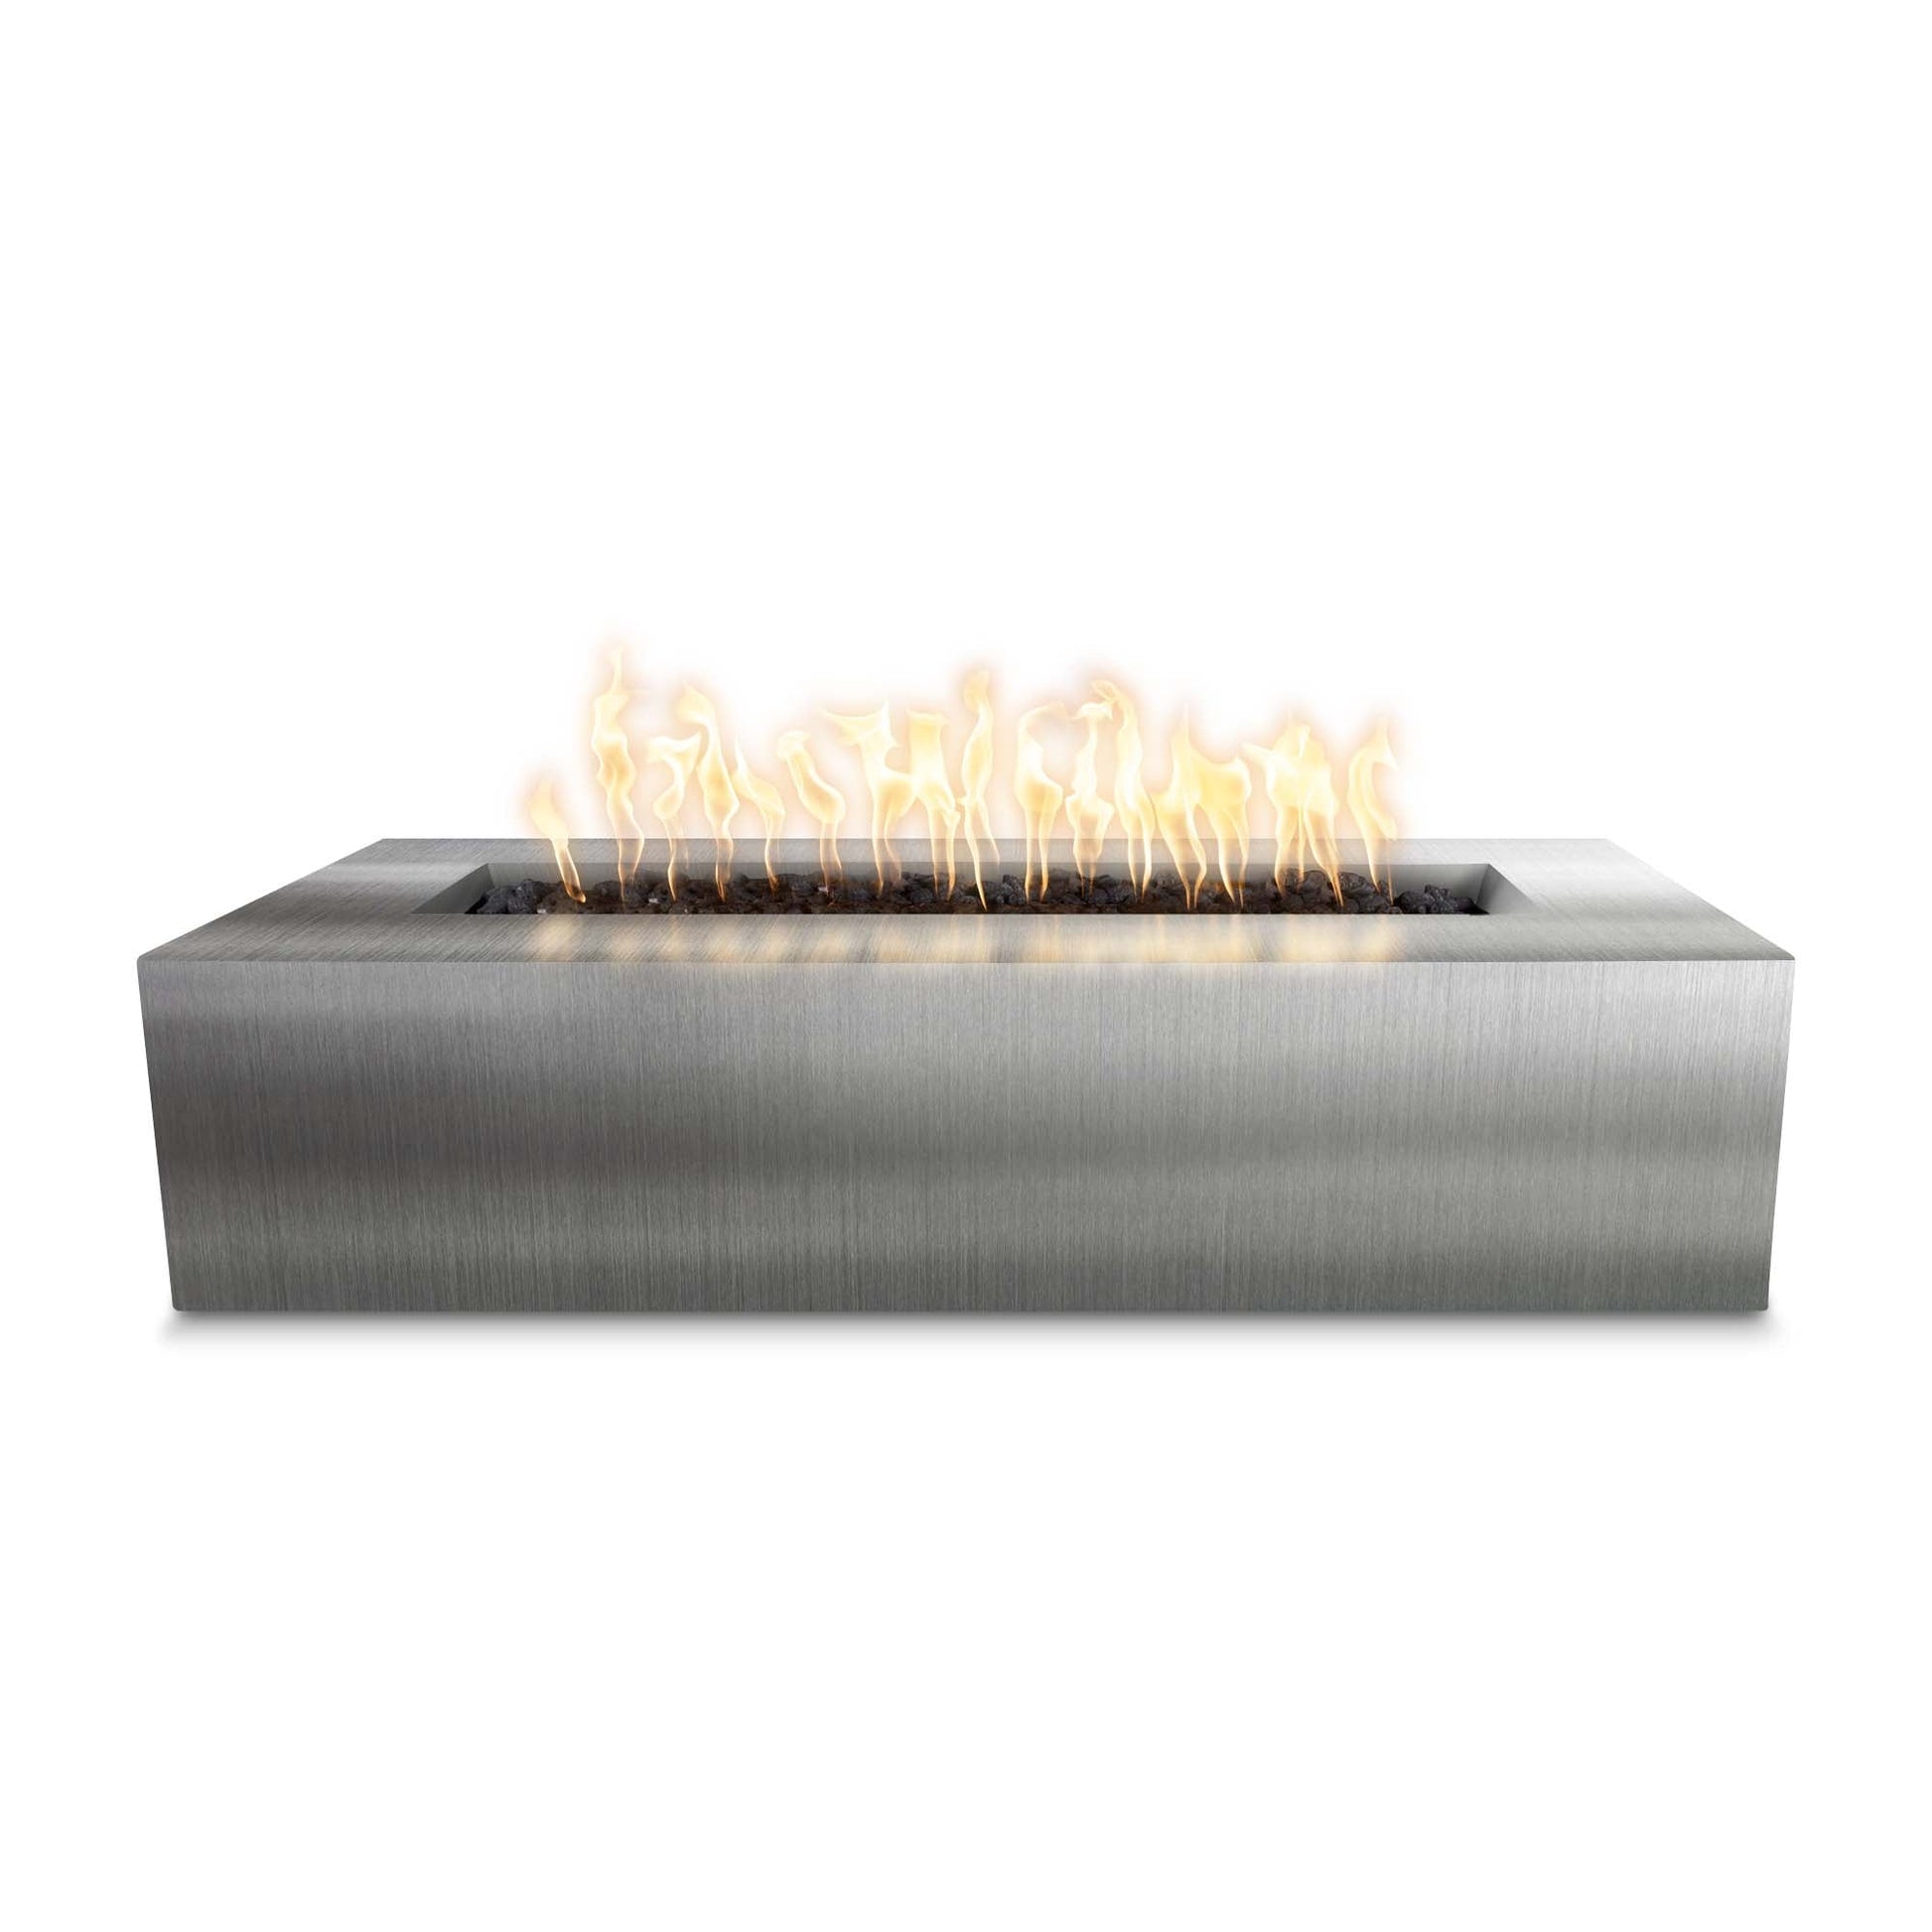 The Outdoor Plus Rectangular Regal 60" Corten Steel Natural Gas Fire Pit with Match Lit with Flame Sense Ignition